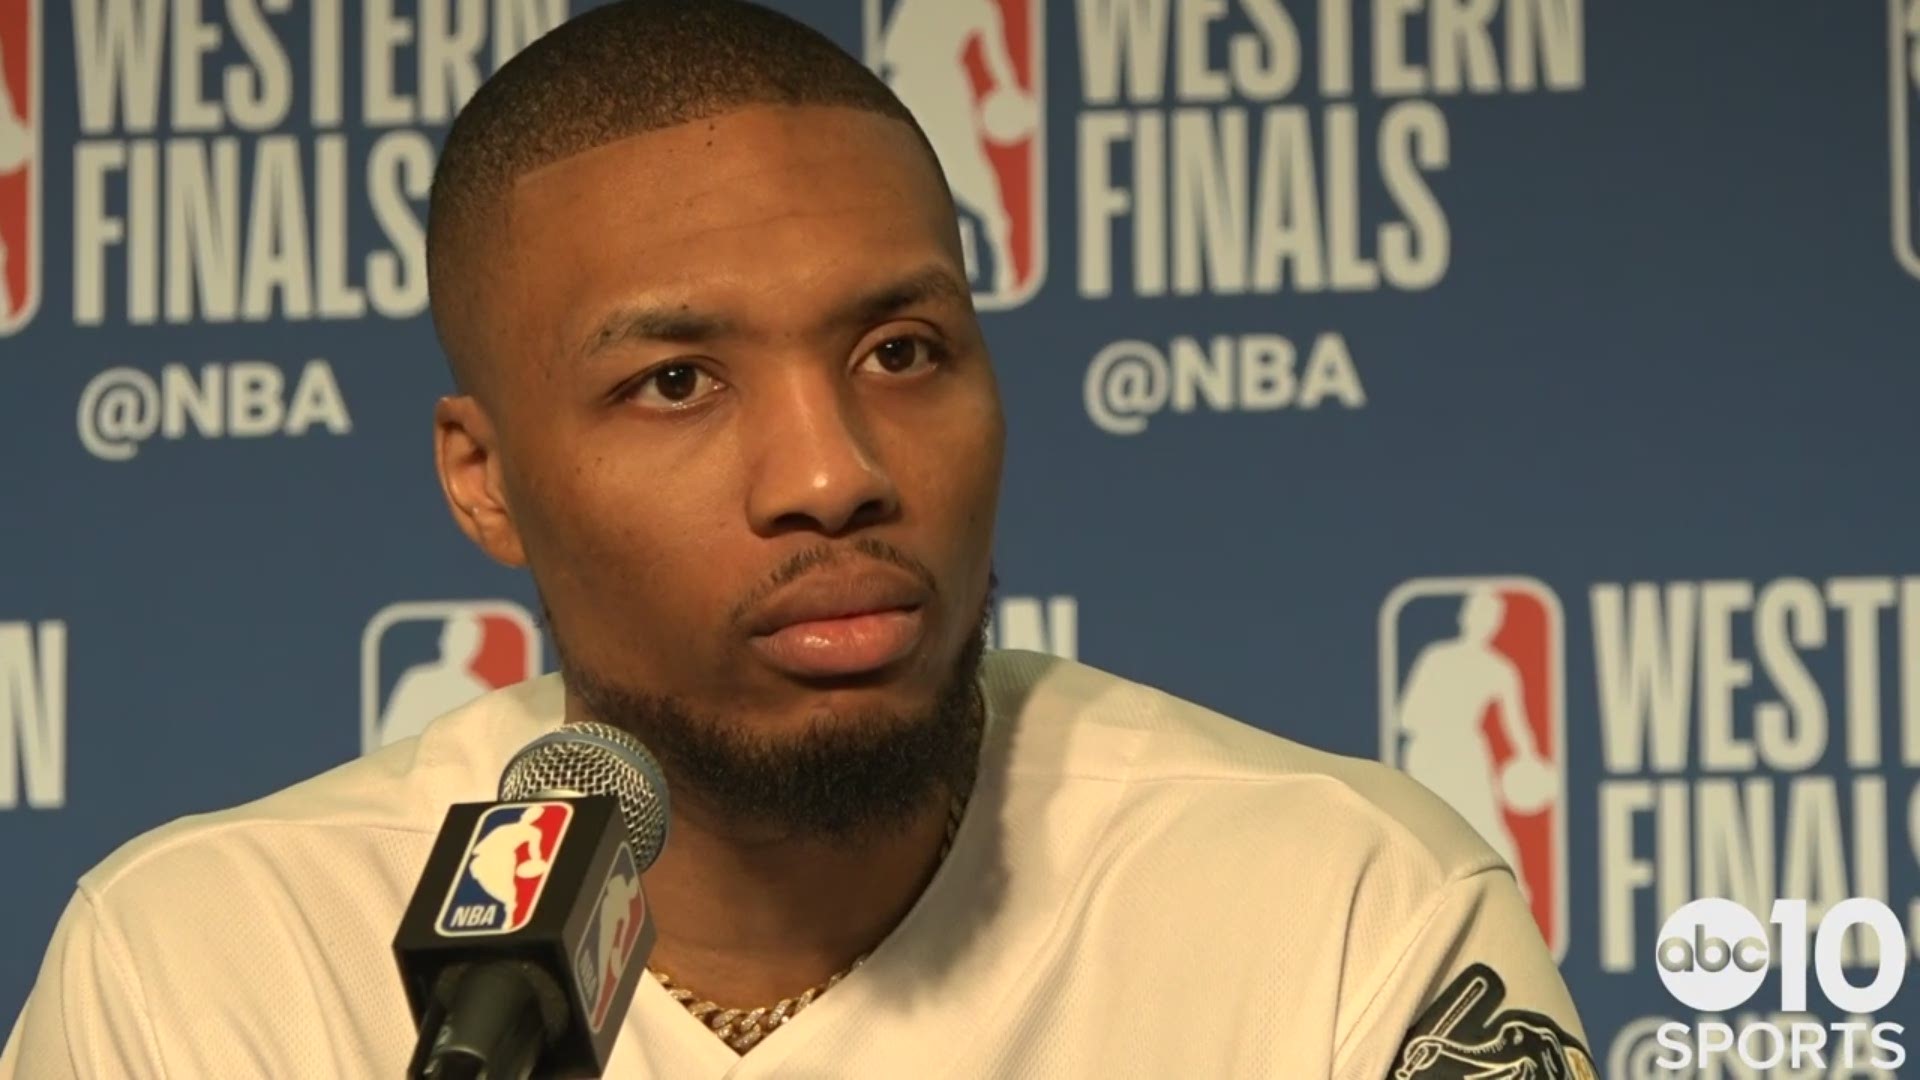 Trail Blazers point guard Damian Lillard talks about his team's rough shooting night, the defense allowing Stephen Curry to bury nine three-pointers and playing in the Western Conference Finals in his hometown of Oakland, following Portland's Game 1 loss to the Golden State Warriors.